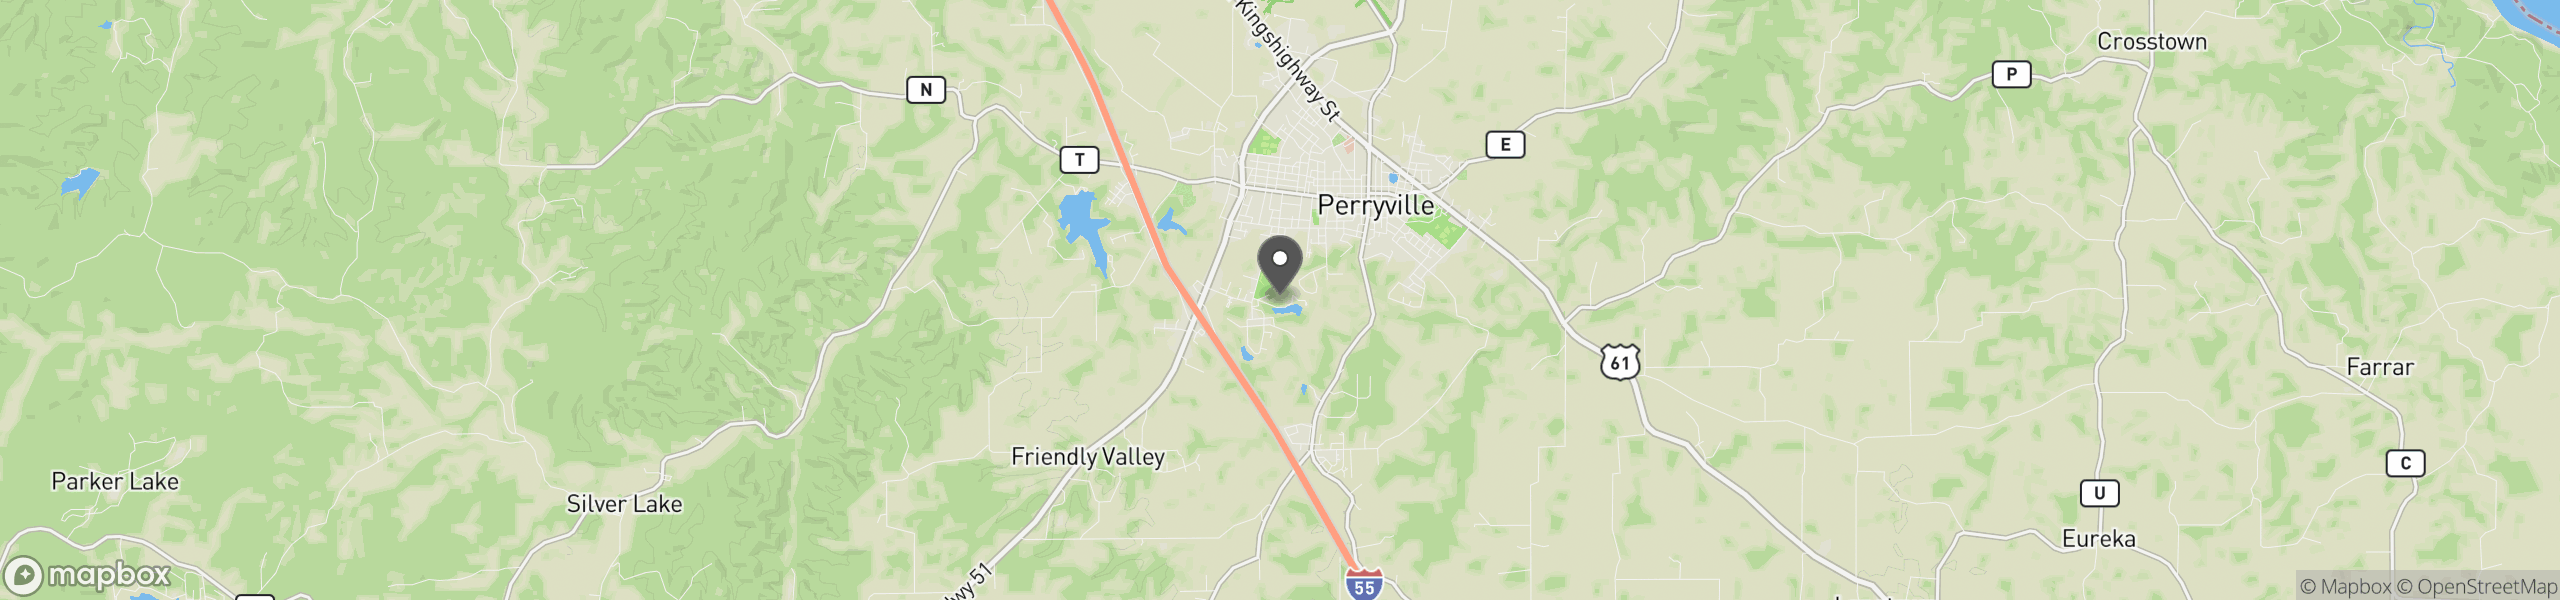 Perryville, MO 63775